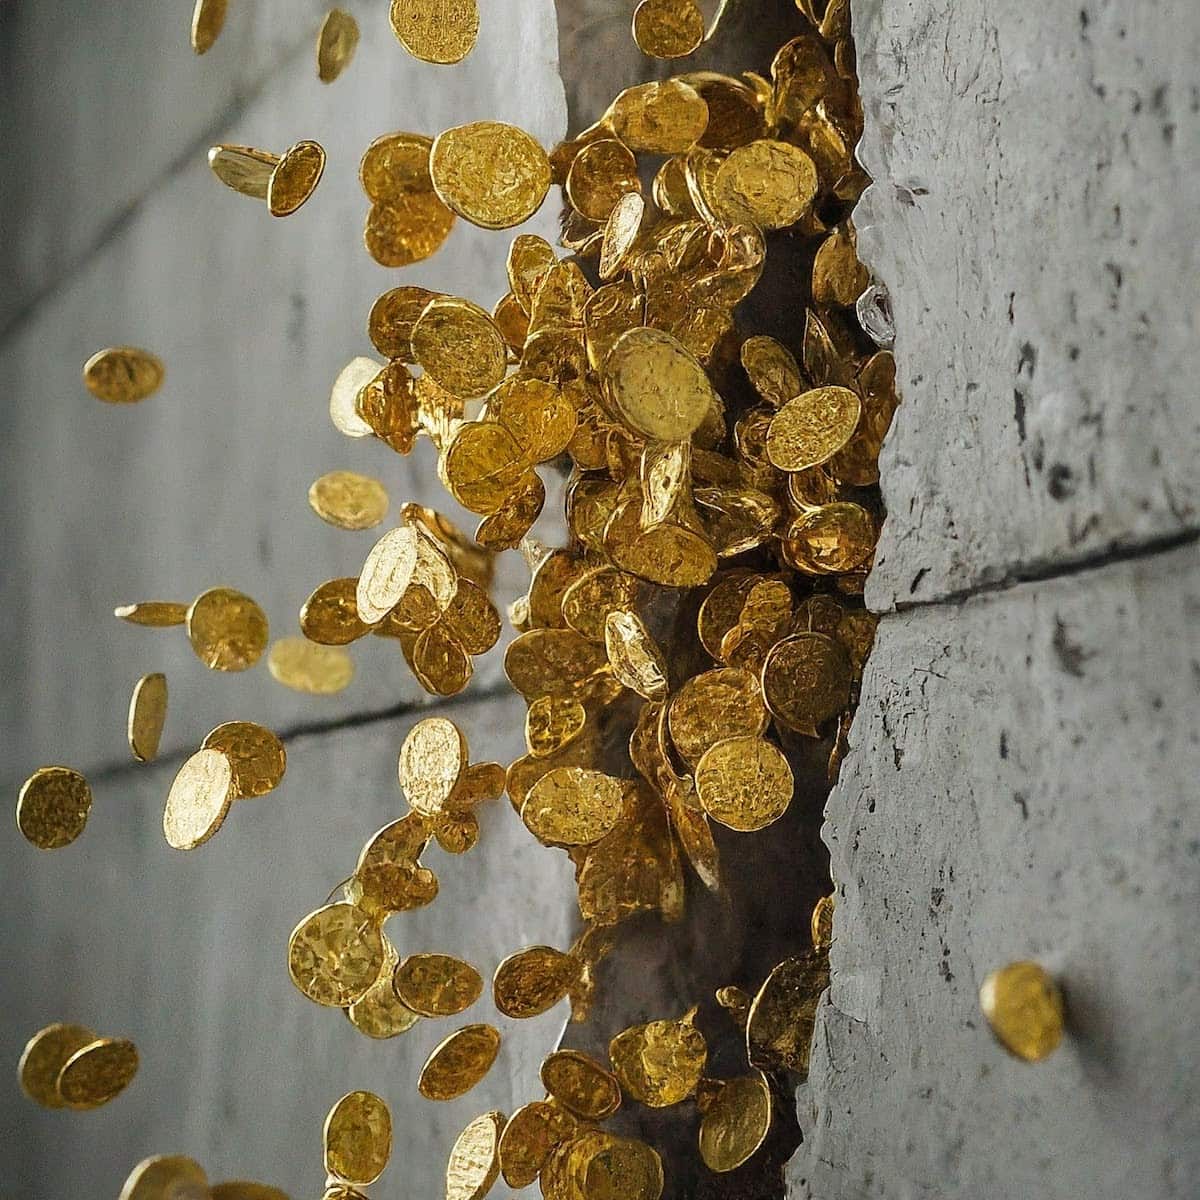 Image of gold coins pouring out a crack in the wall